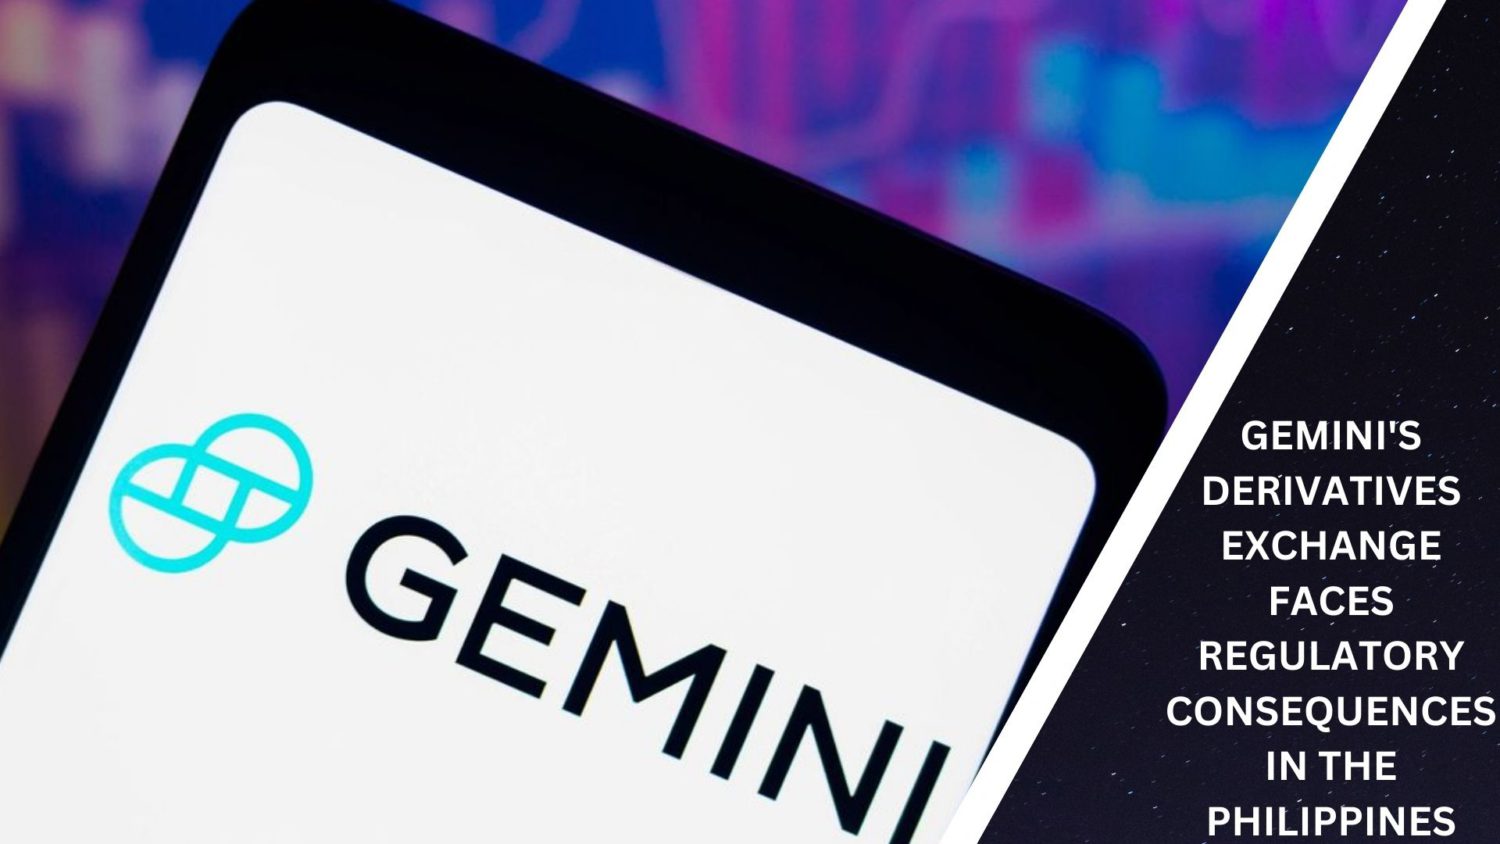 Gemini'S Derivatives Exchange Faces Regulatory Consequences In The Philippines